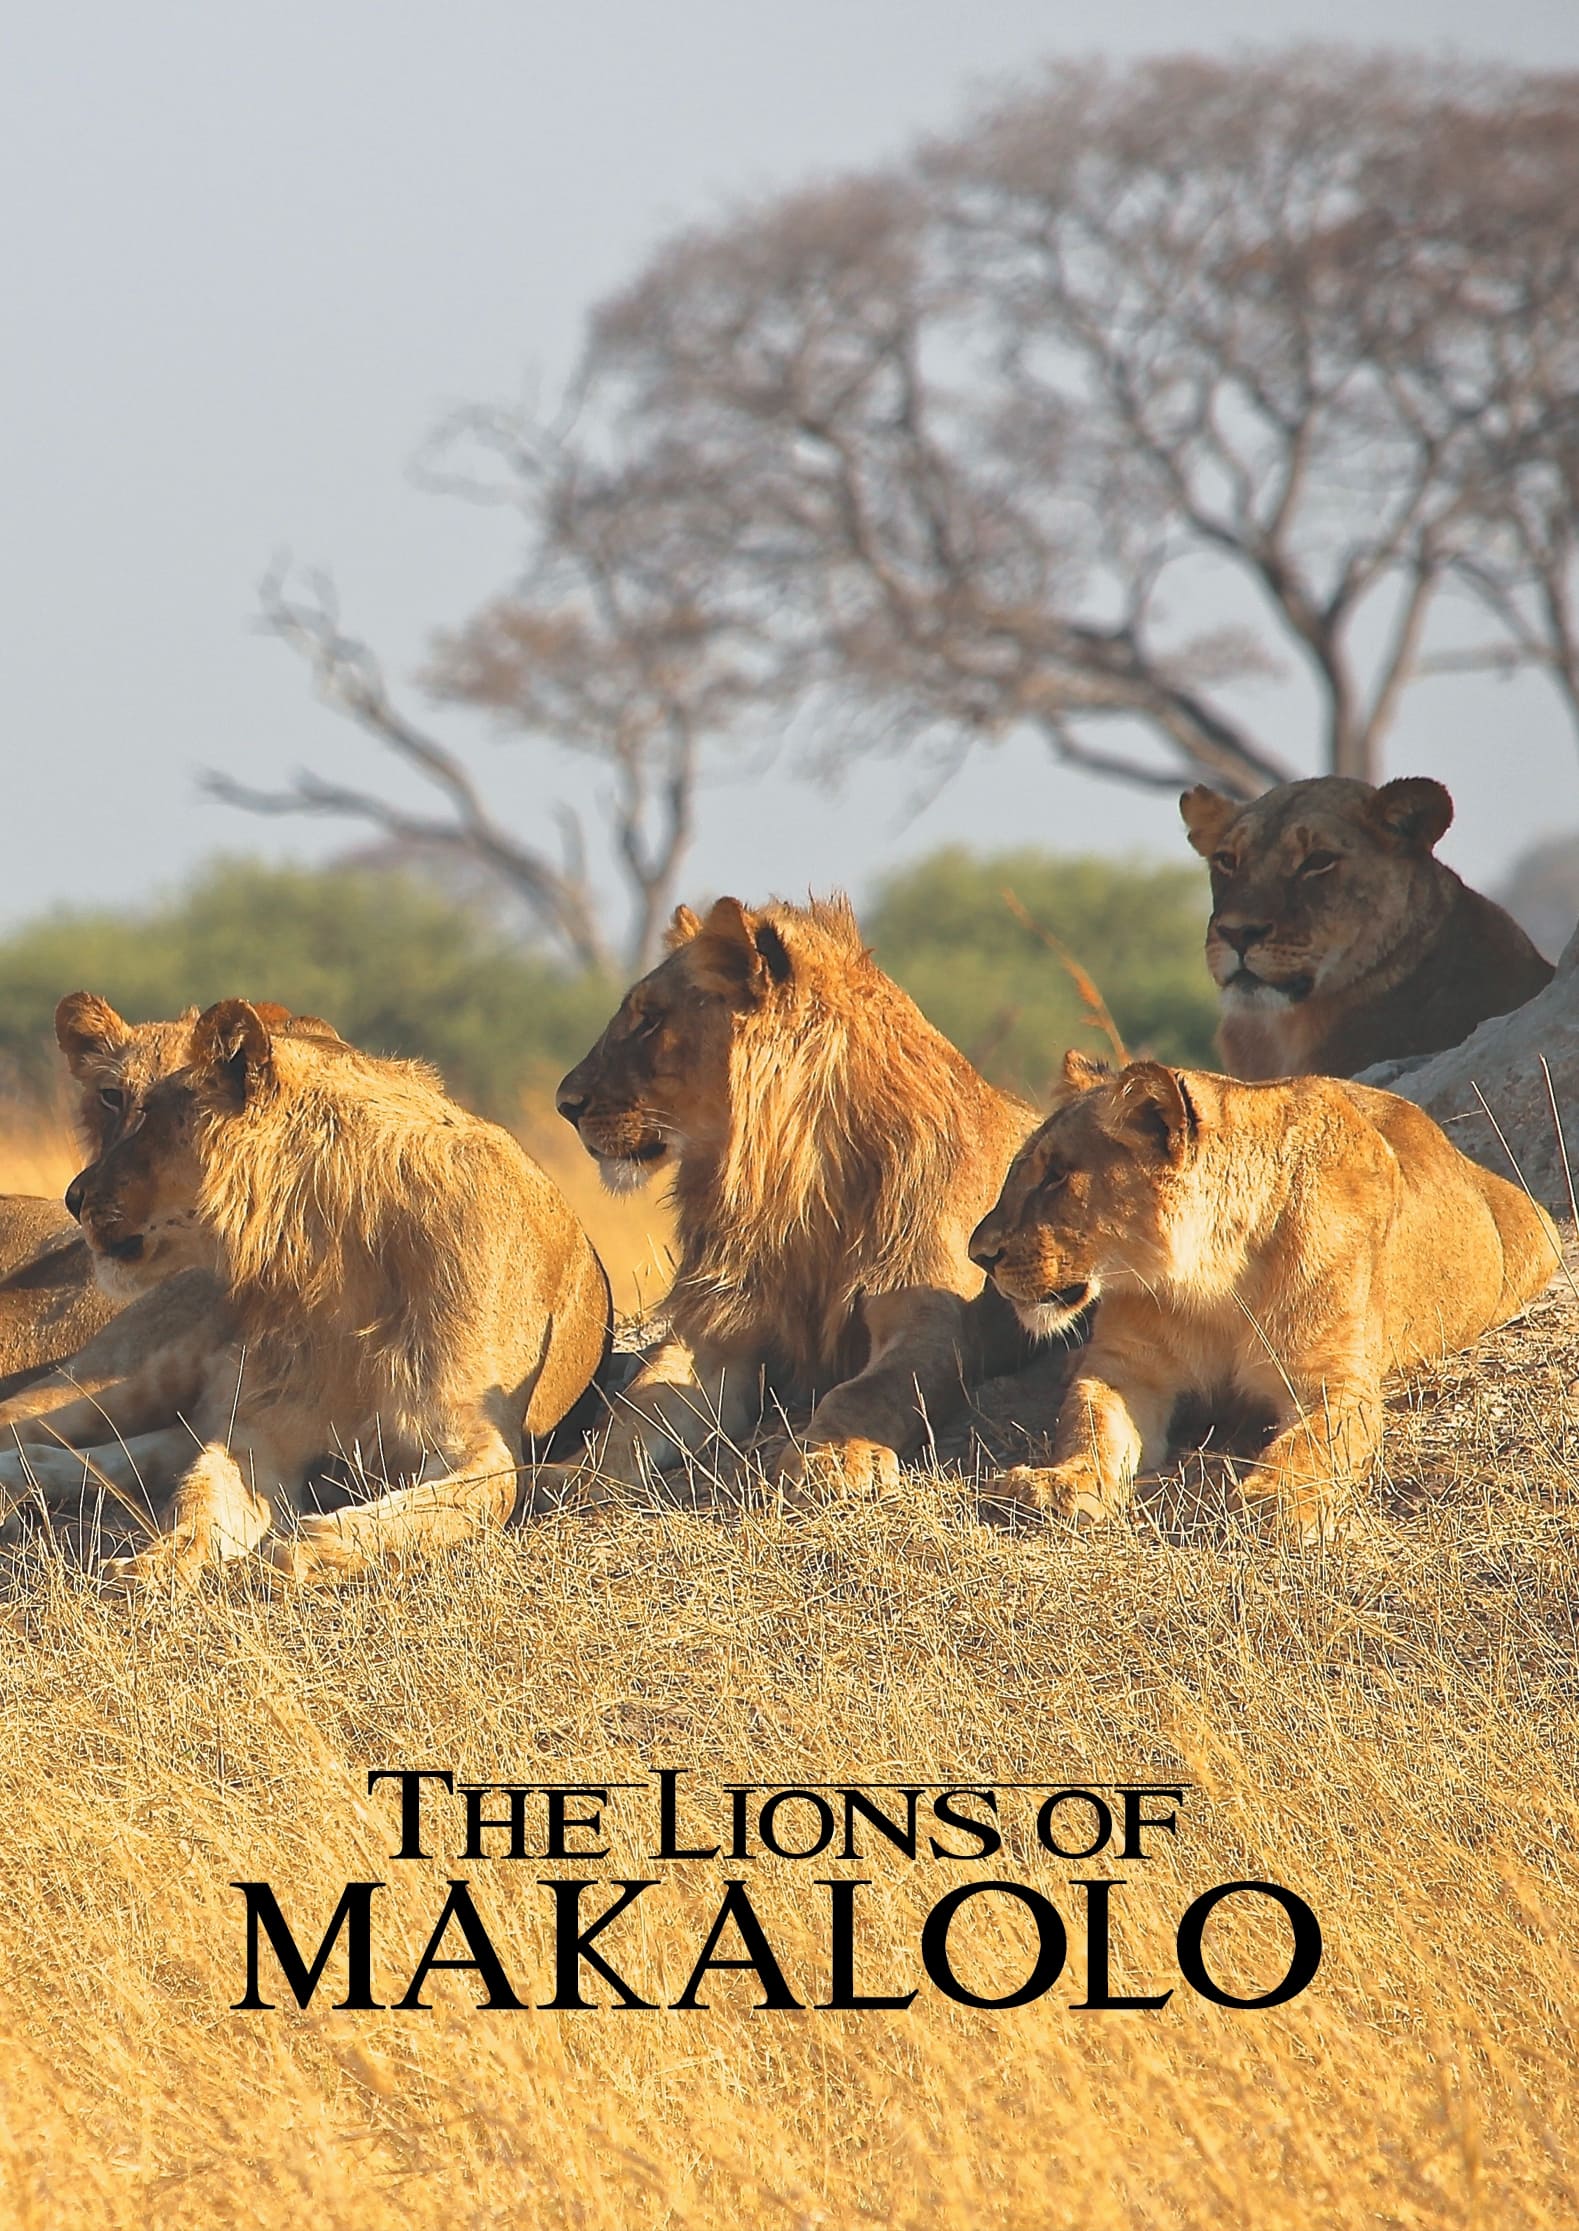 The Lions of Makalolo